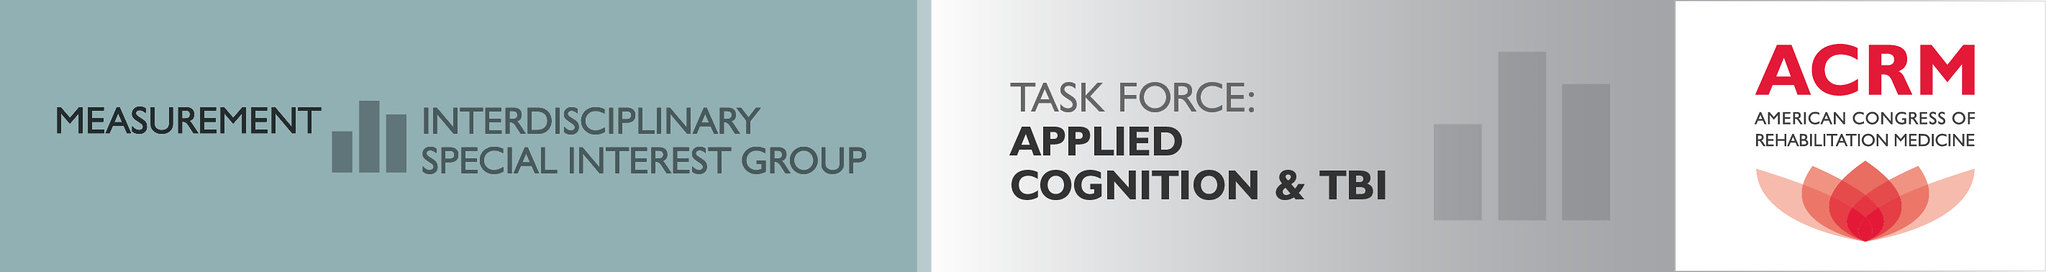 ACRM Measurement ISIG Applied Cognition & TBI Task Force banner